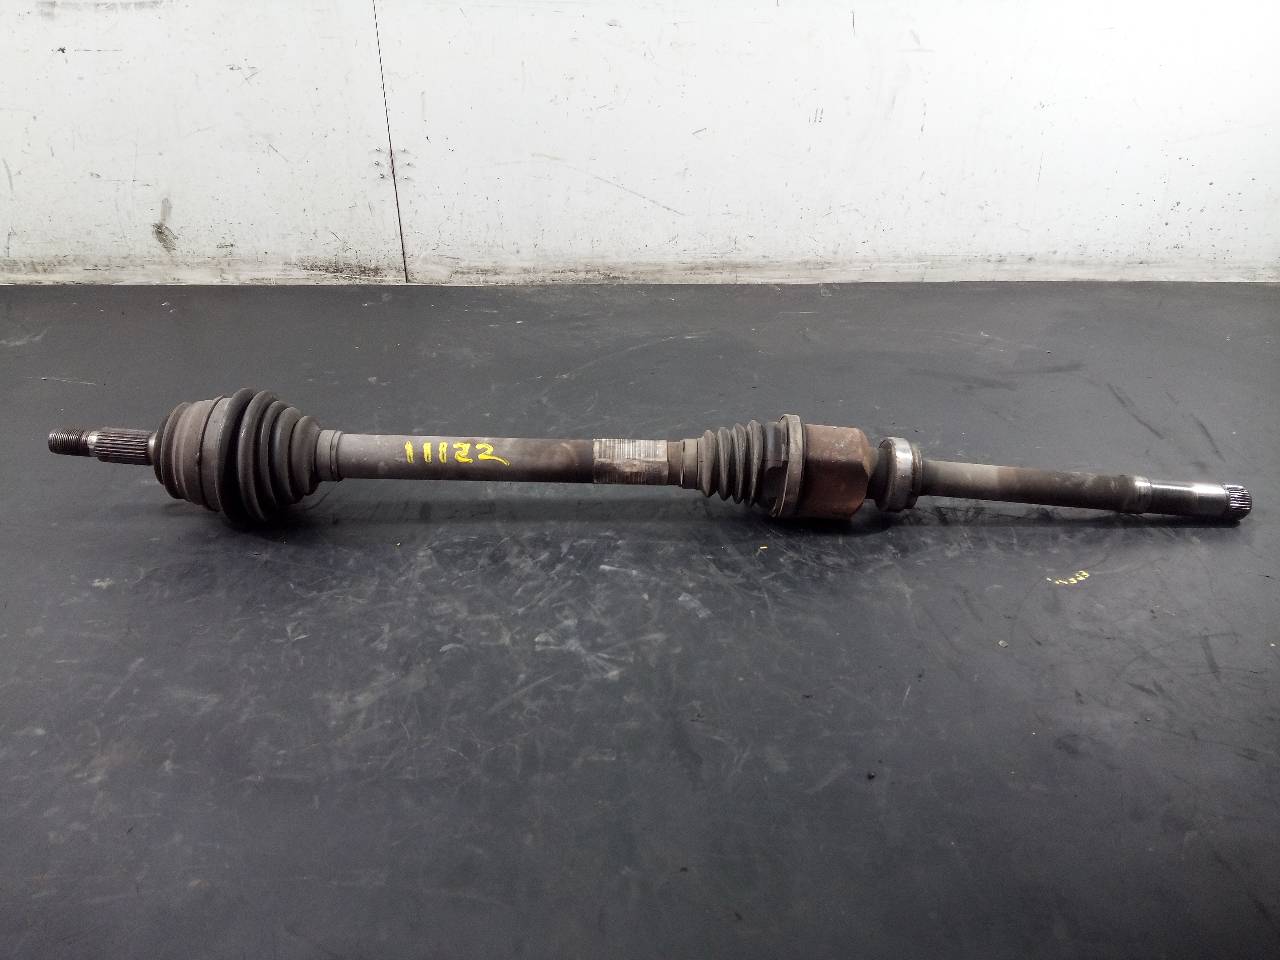 CITROËN C4 Picasso 2 generation (2013-2018) Front Right Driveshaft 9677916180, P1-B6-11 24071860